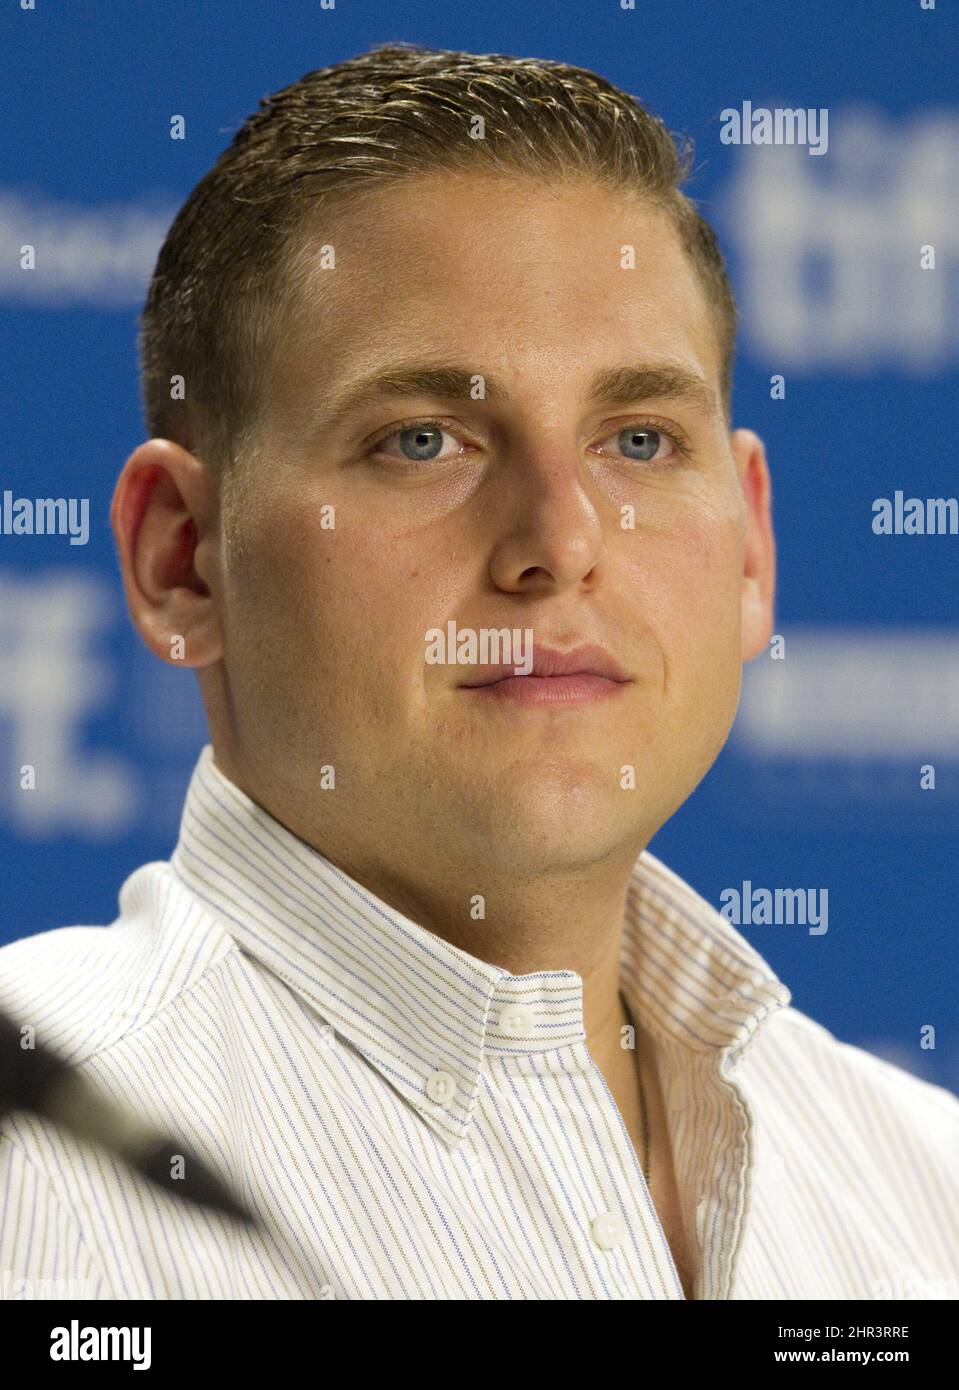 Actor Jonah Hill attends a press conference for the film 'Moneyball' at the Toronto International Film Festival in Toronto Friday, September 9, 2011. THE CANADIAN PRESS/ Stock Photo